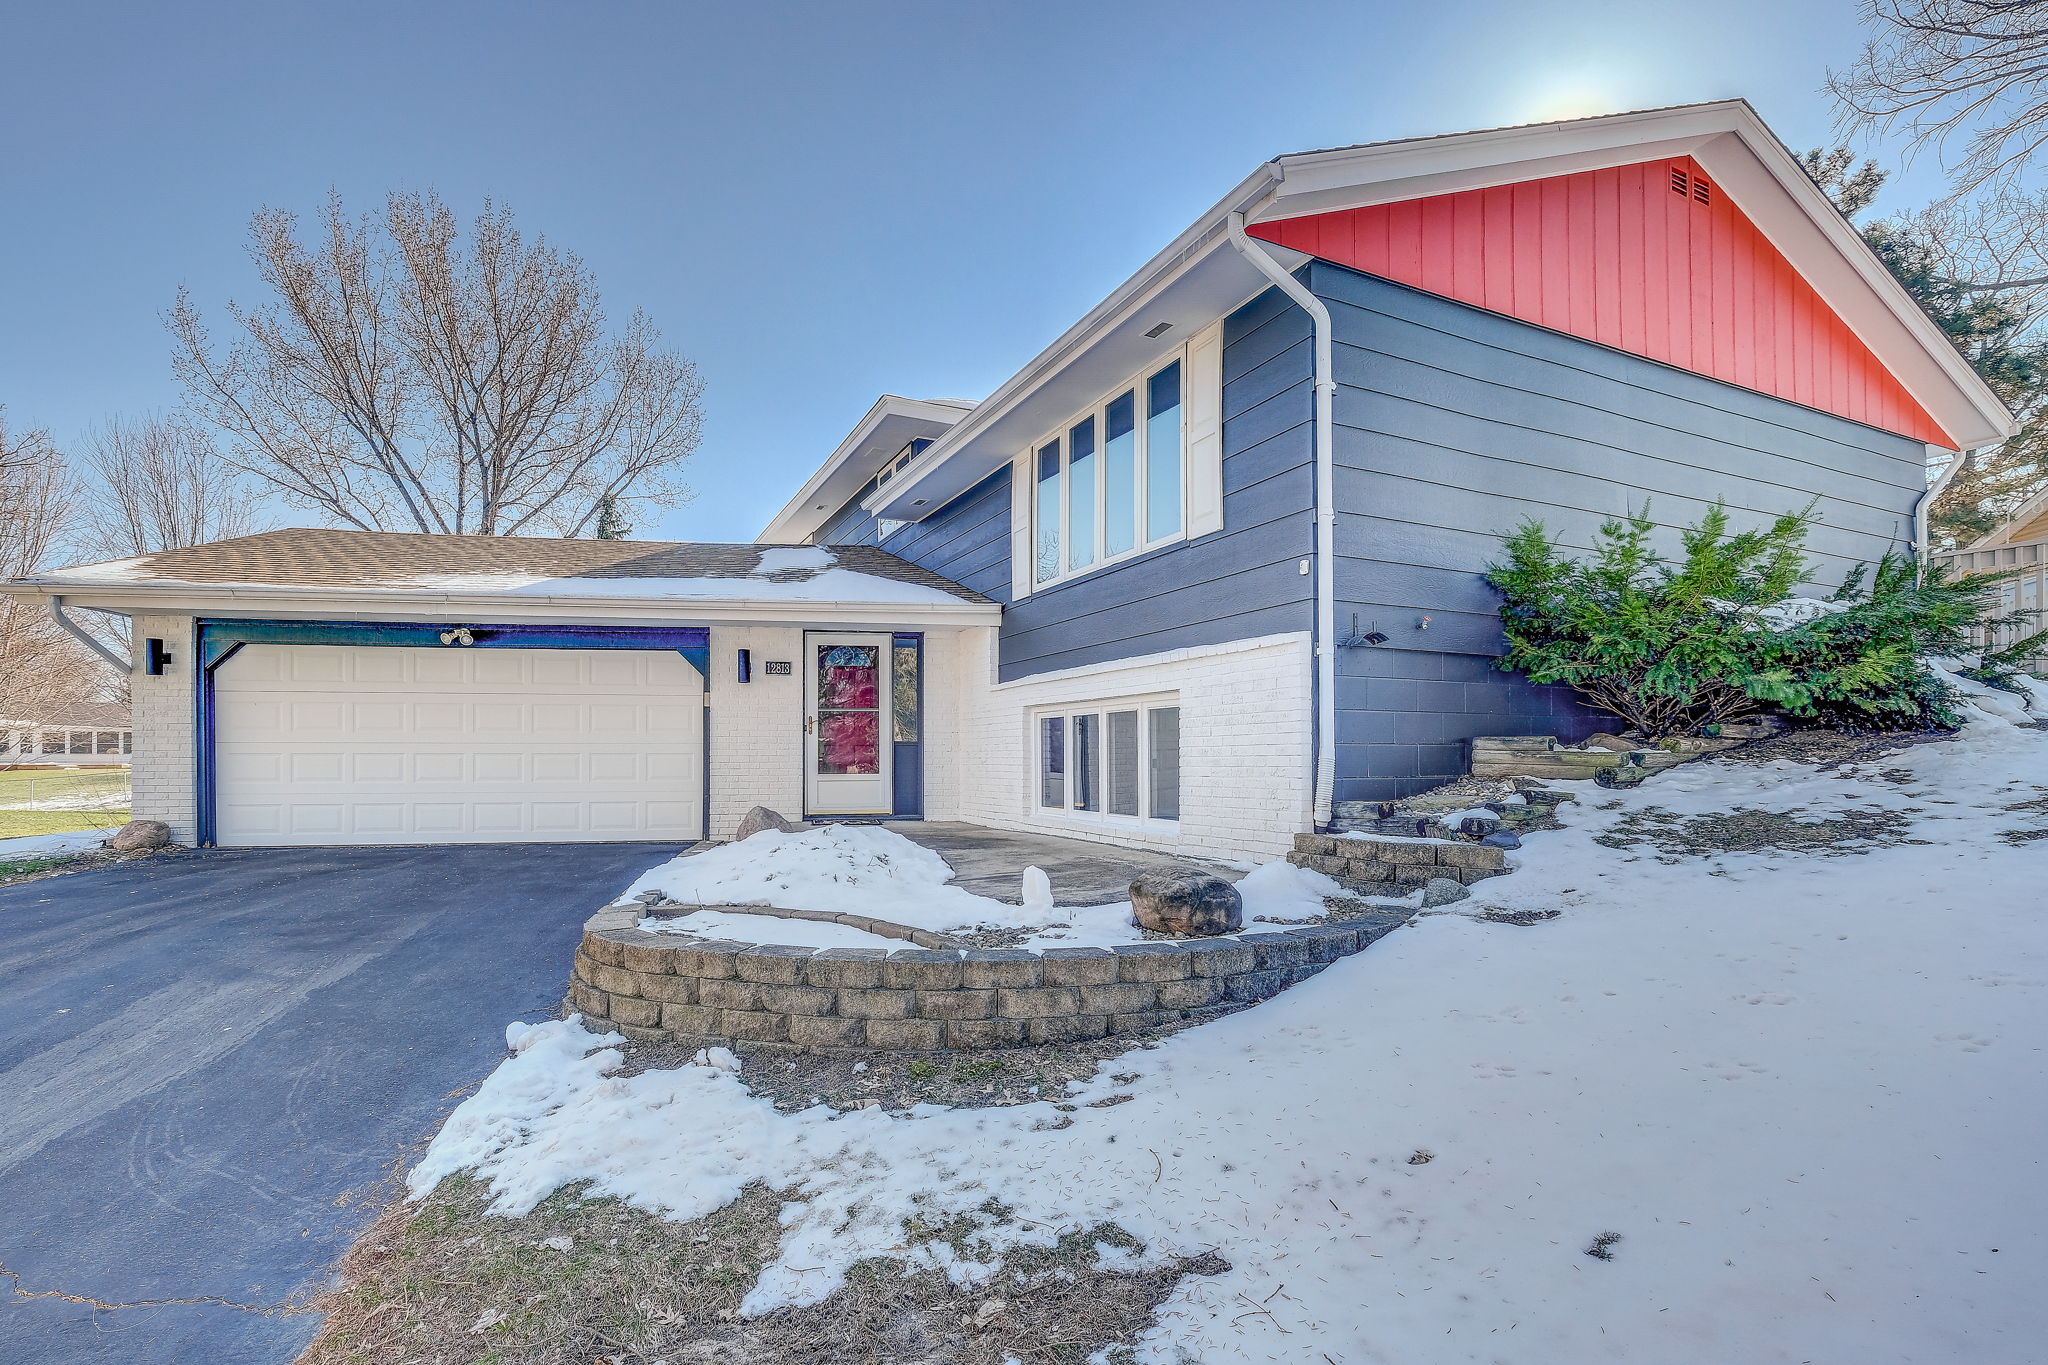  12813 Country View Ln, Burnsville, MN 55337, US